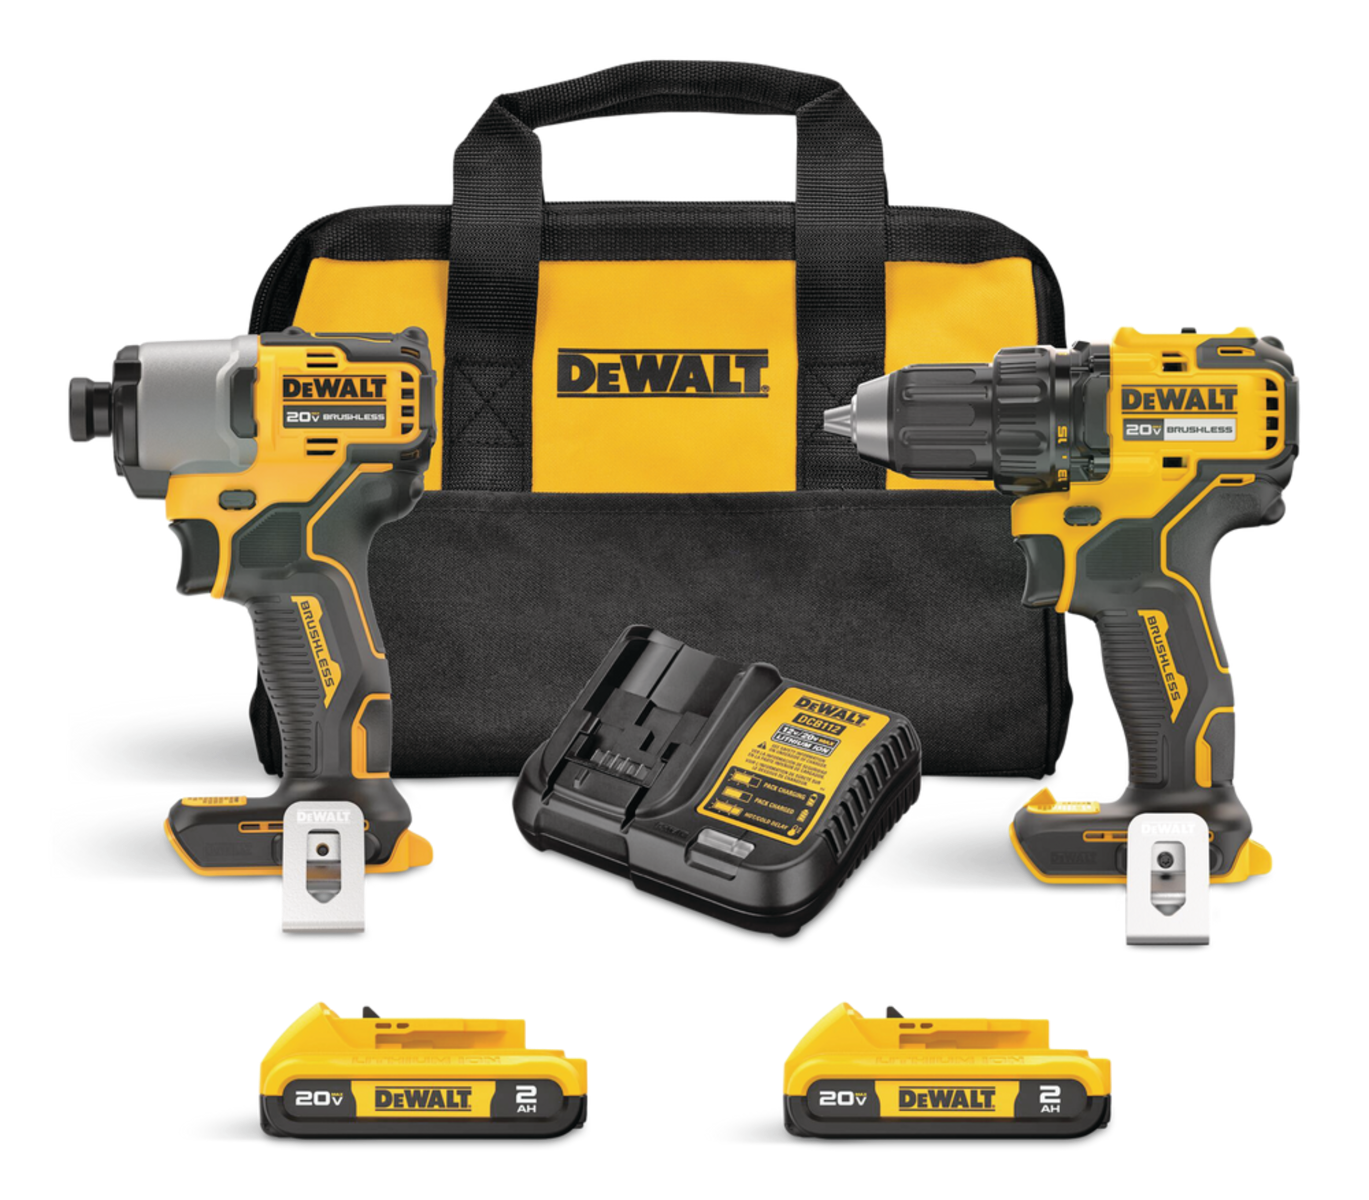 DEWALT 20V MAX 2-Tool Brushless Power Tool Combo Kit with Soft Case (2-Batteries and Charger Included)